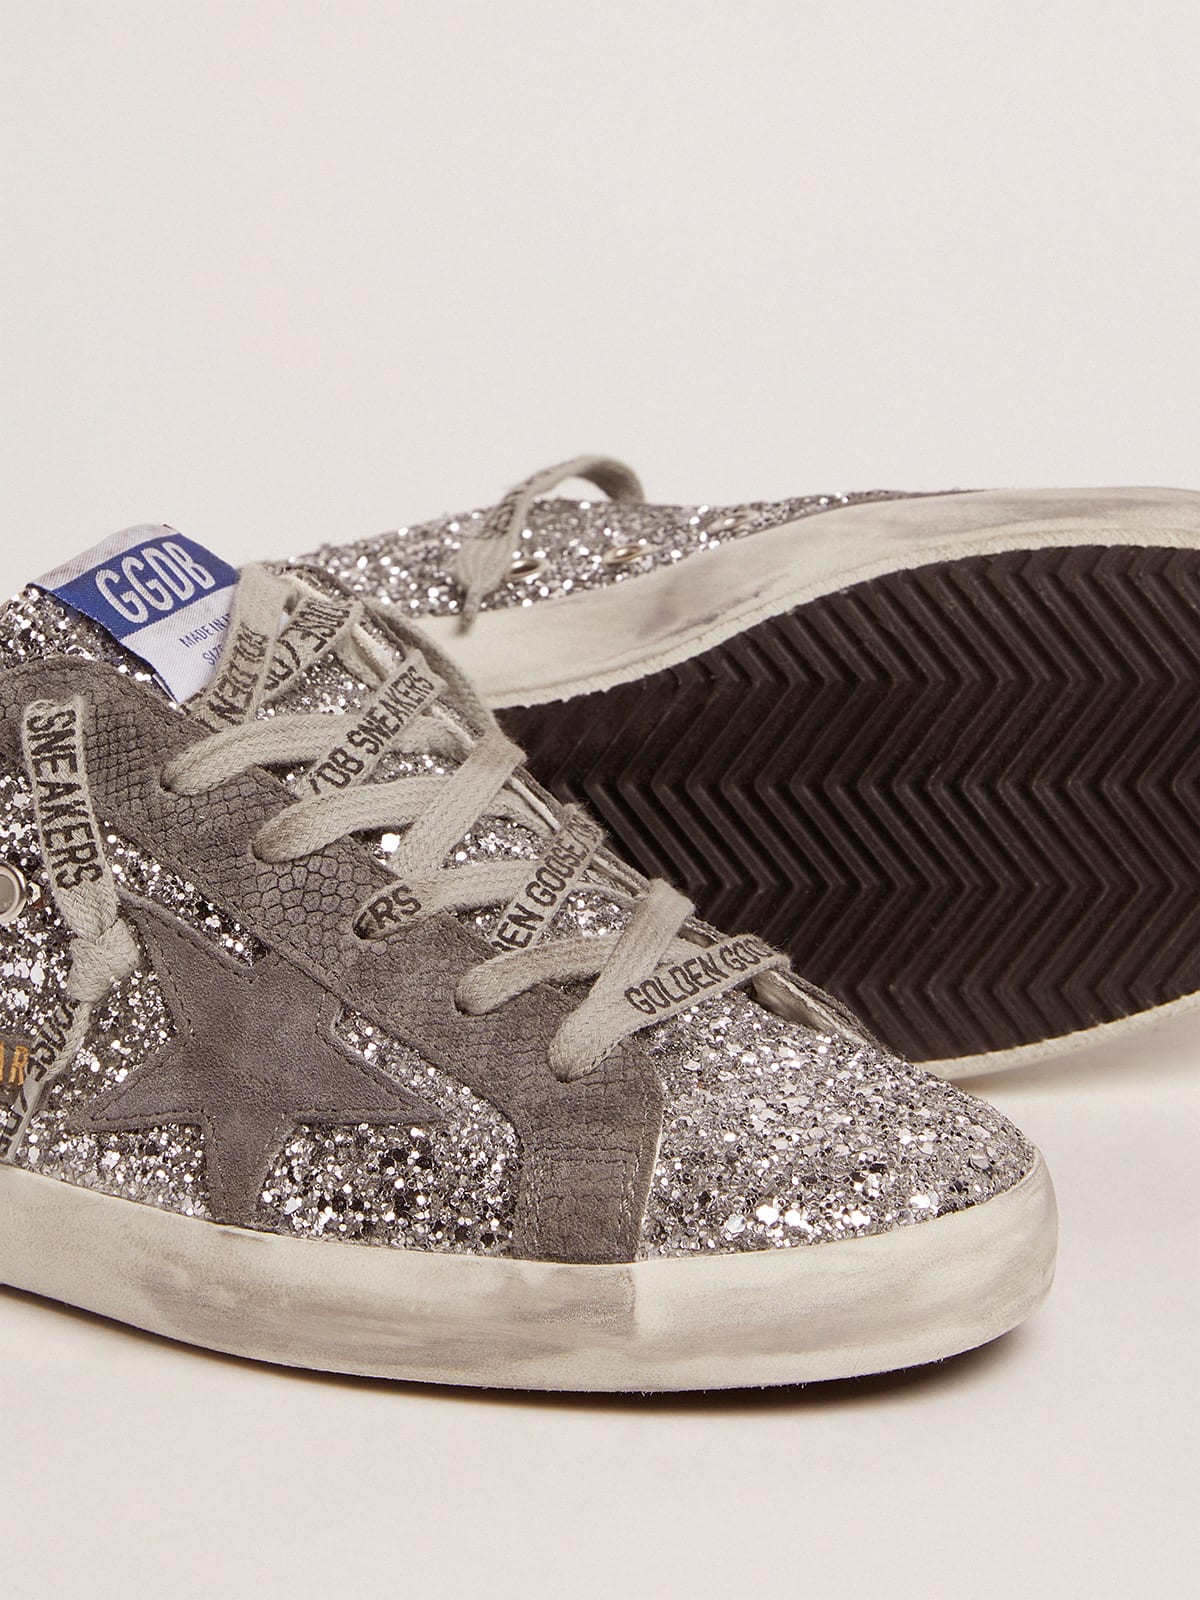 Super-Star sneakers in silver glitter and dark gray suede | Golden Goose